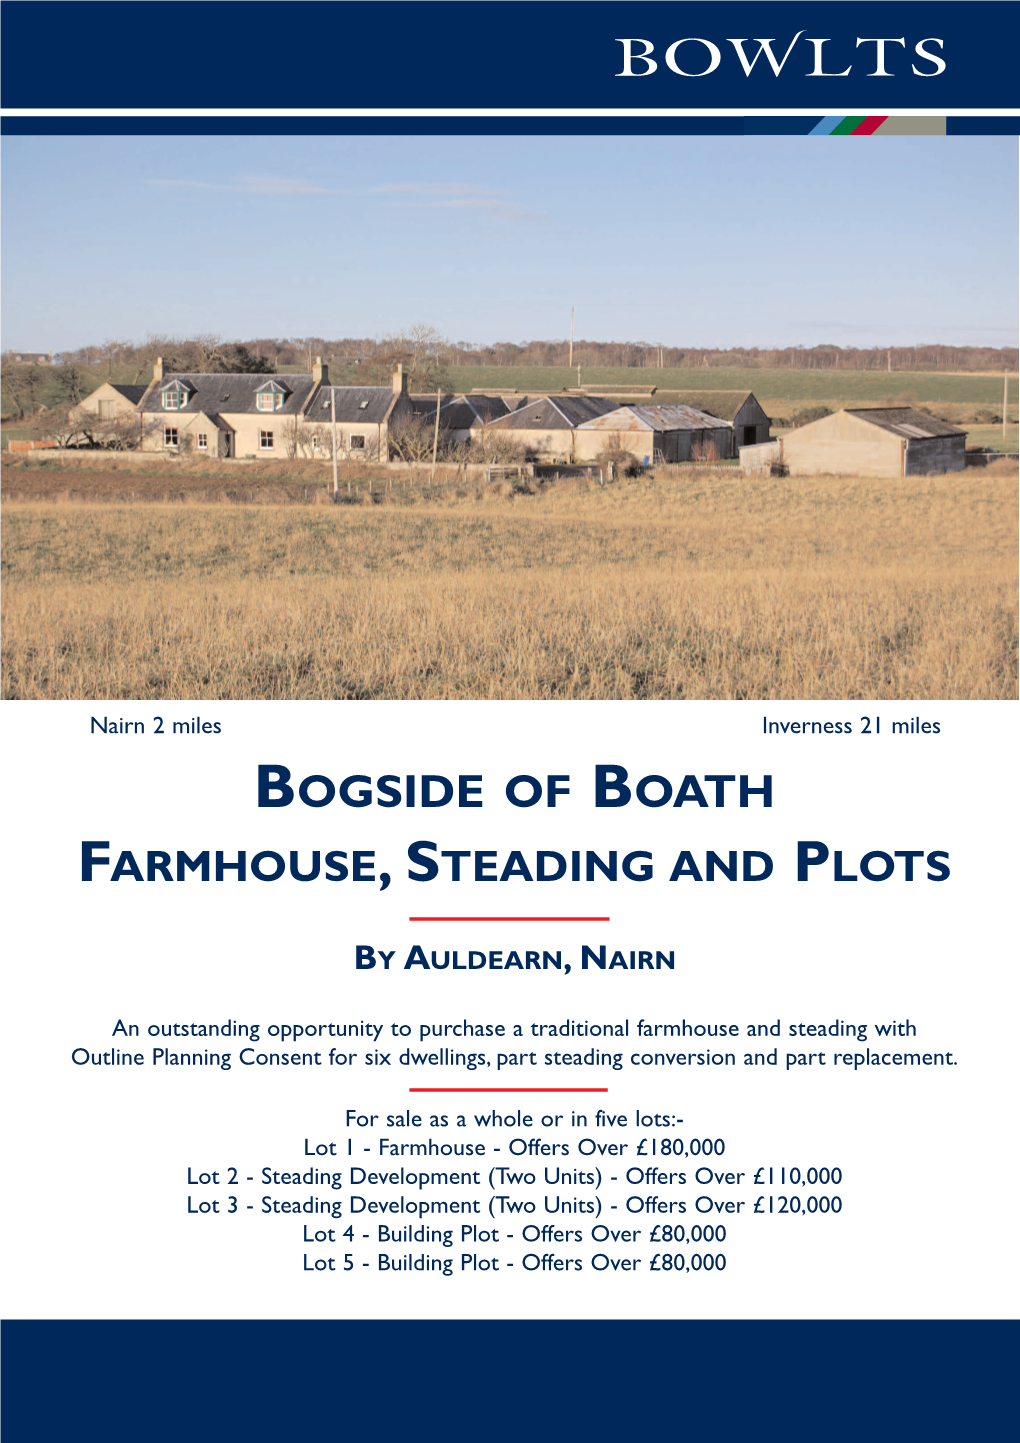 Bogside of Boath Farmhouse,Steading and Plots